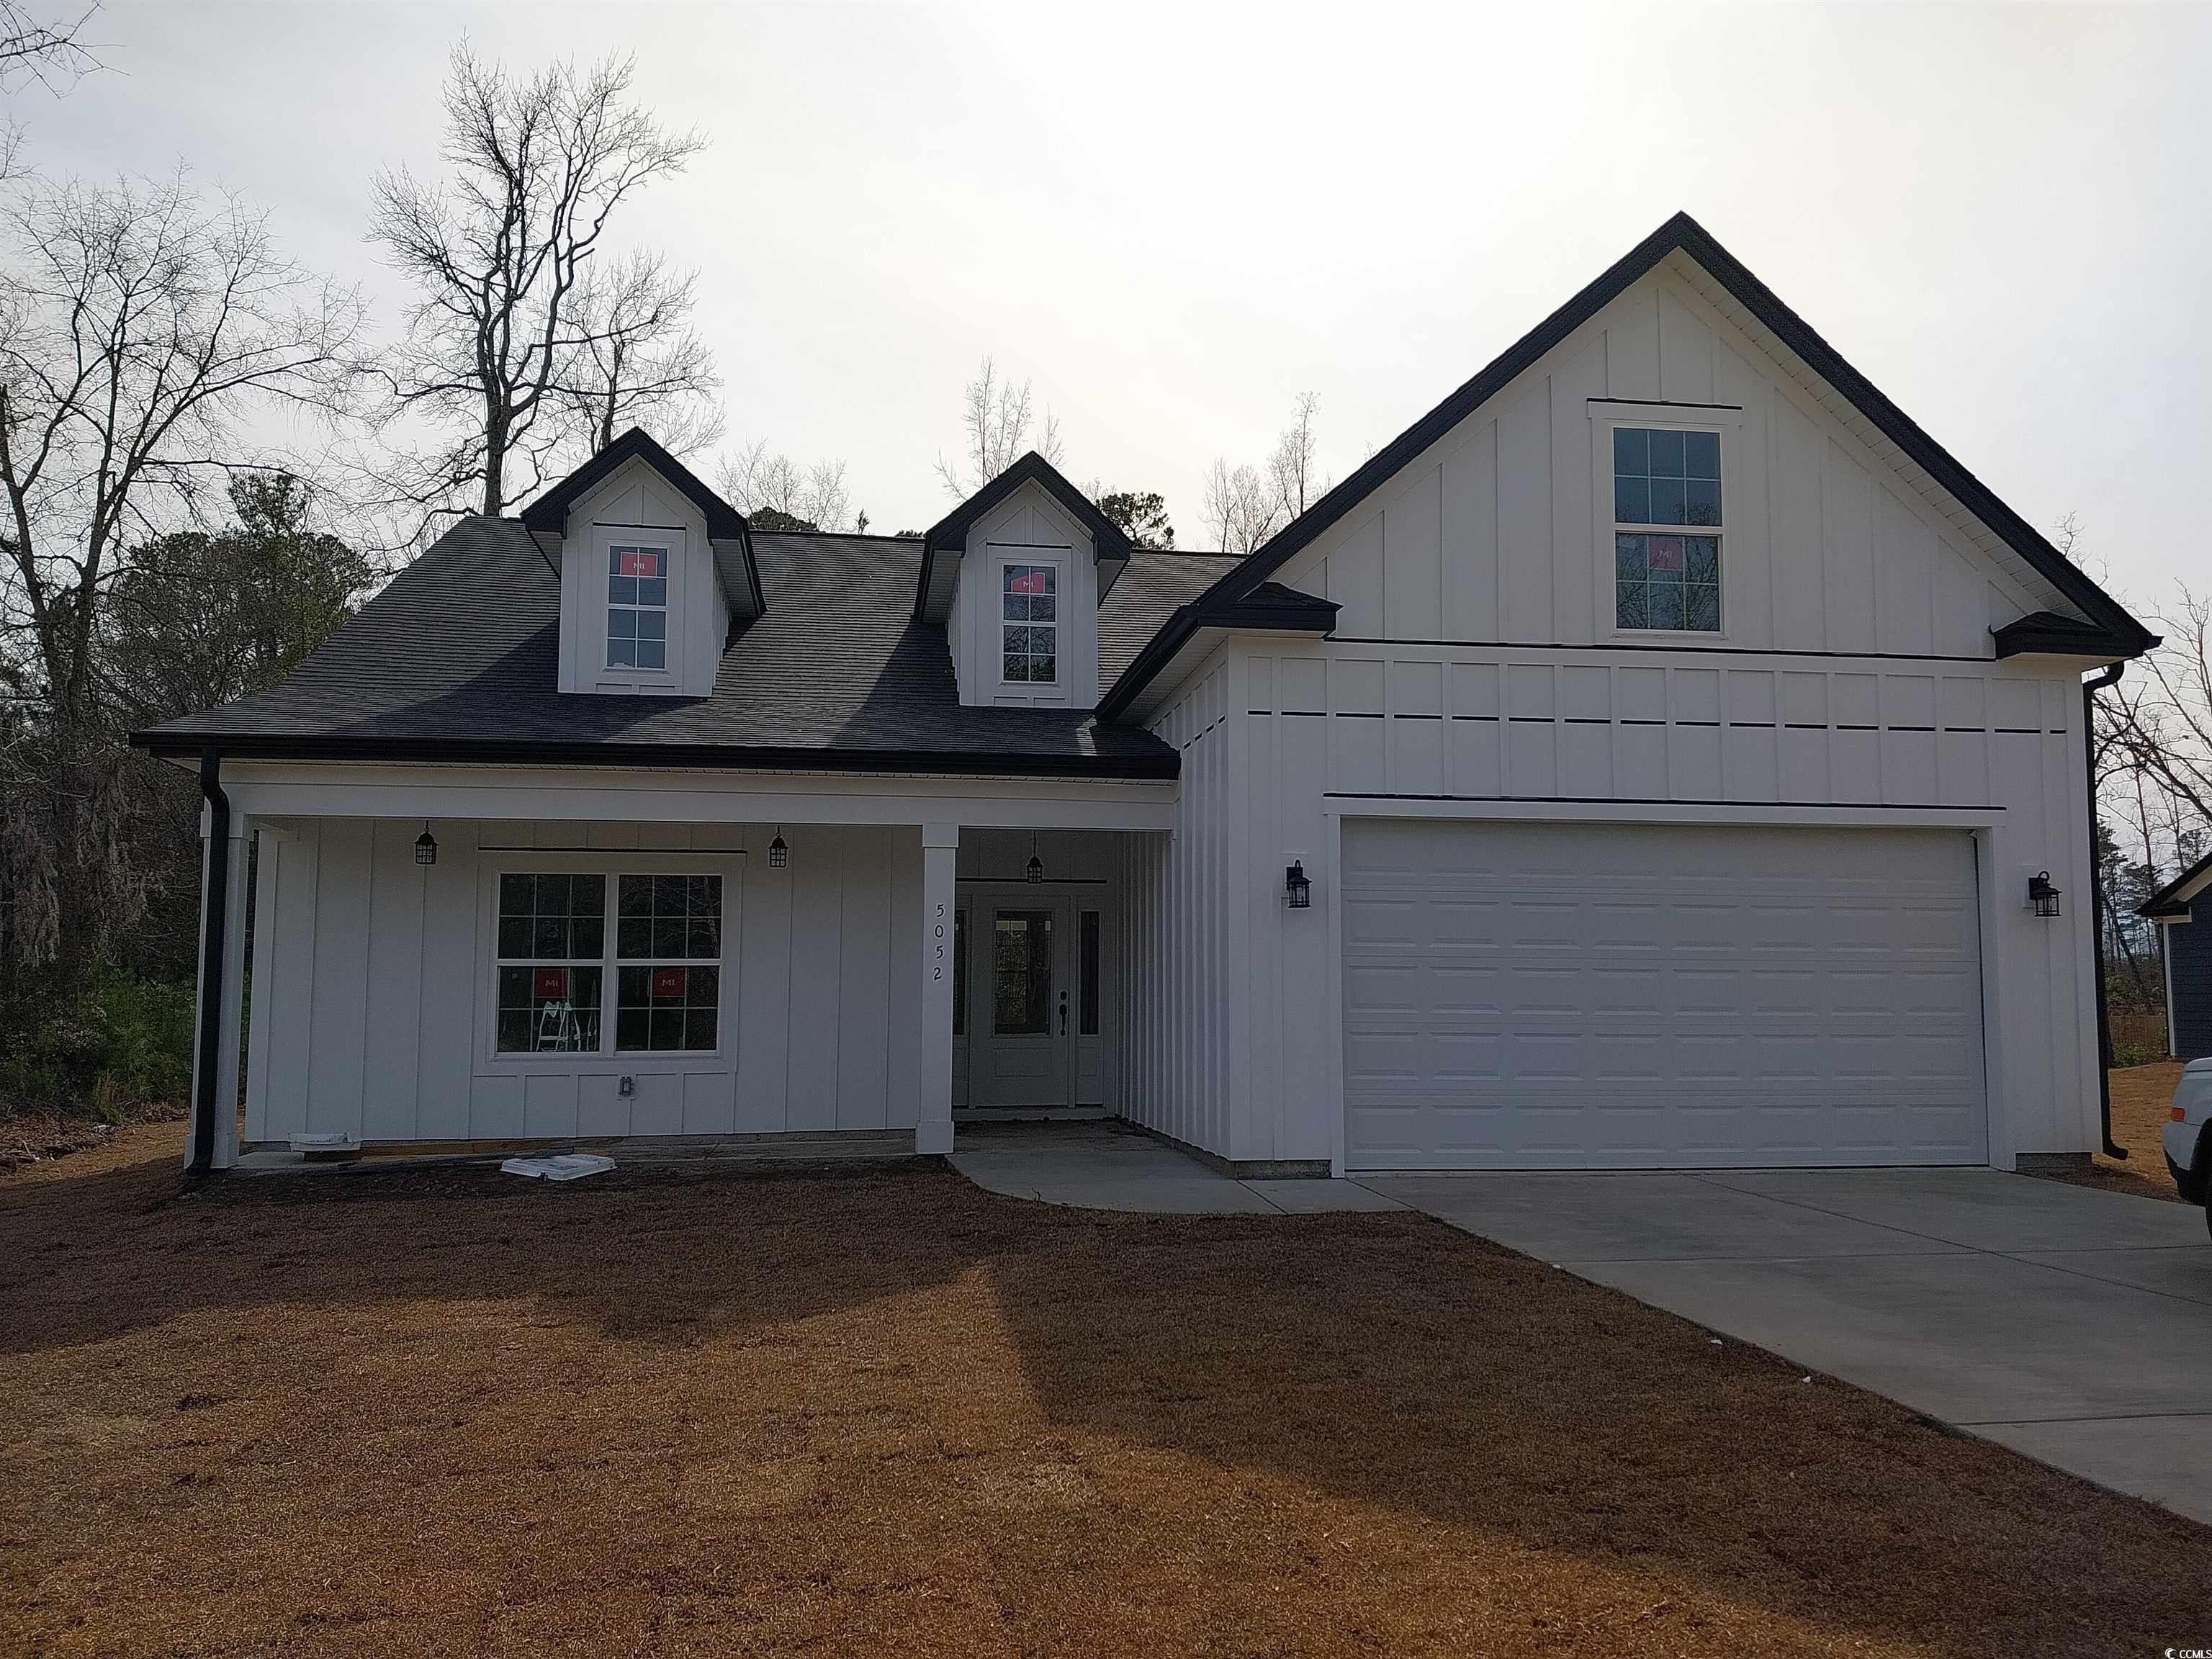 Lot 2 Huckleberry Ln. Conway, SC 29526